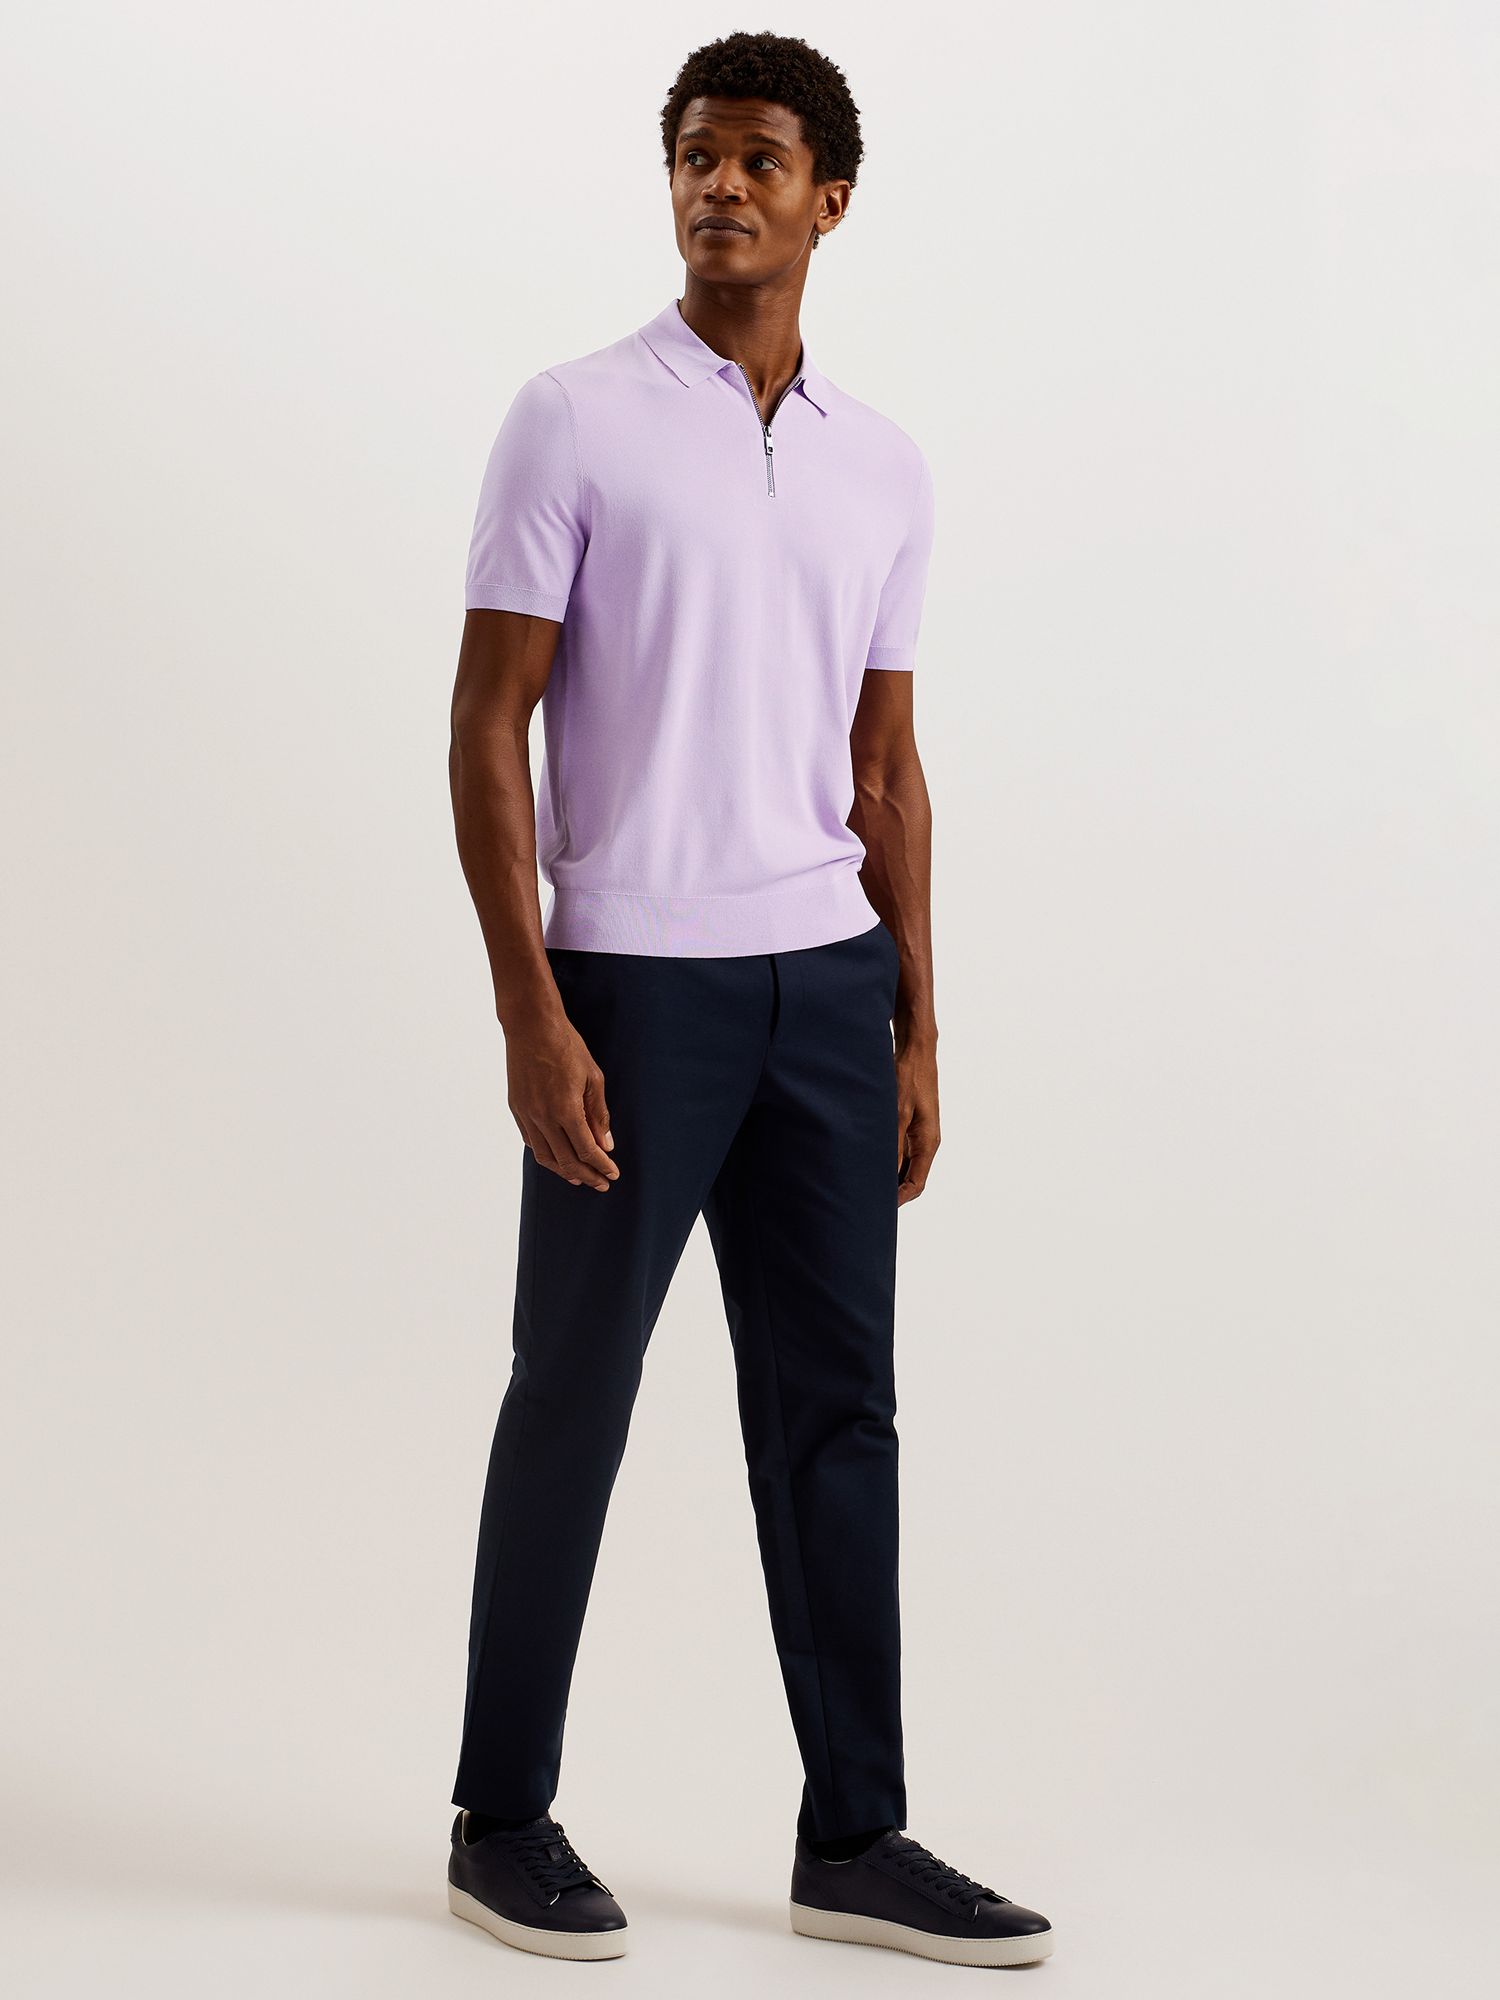 Ted Baker Daldin Short Sleeve Zip Polo Top, Lilac, L